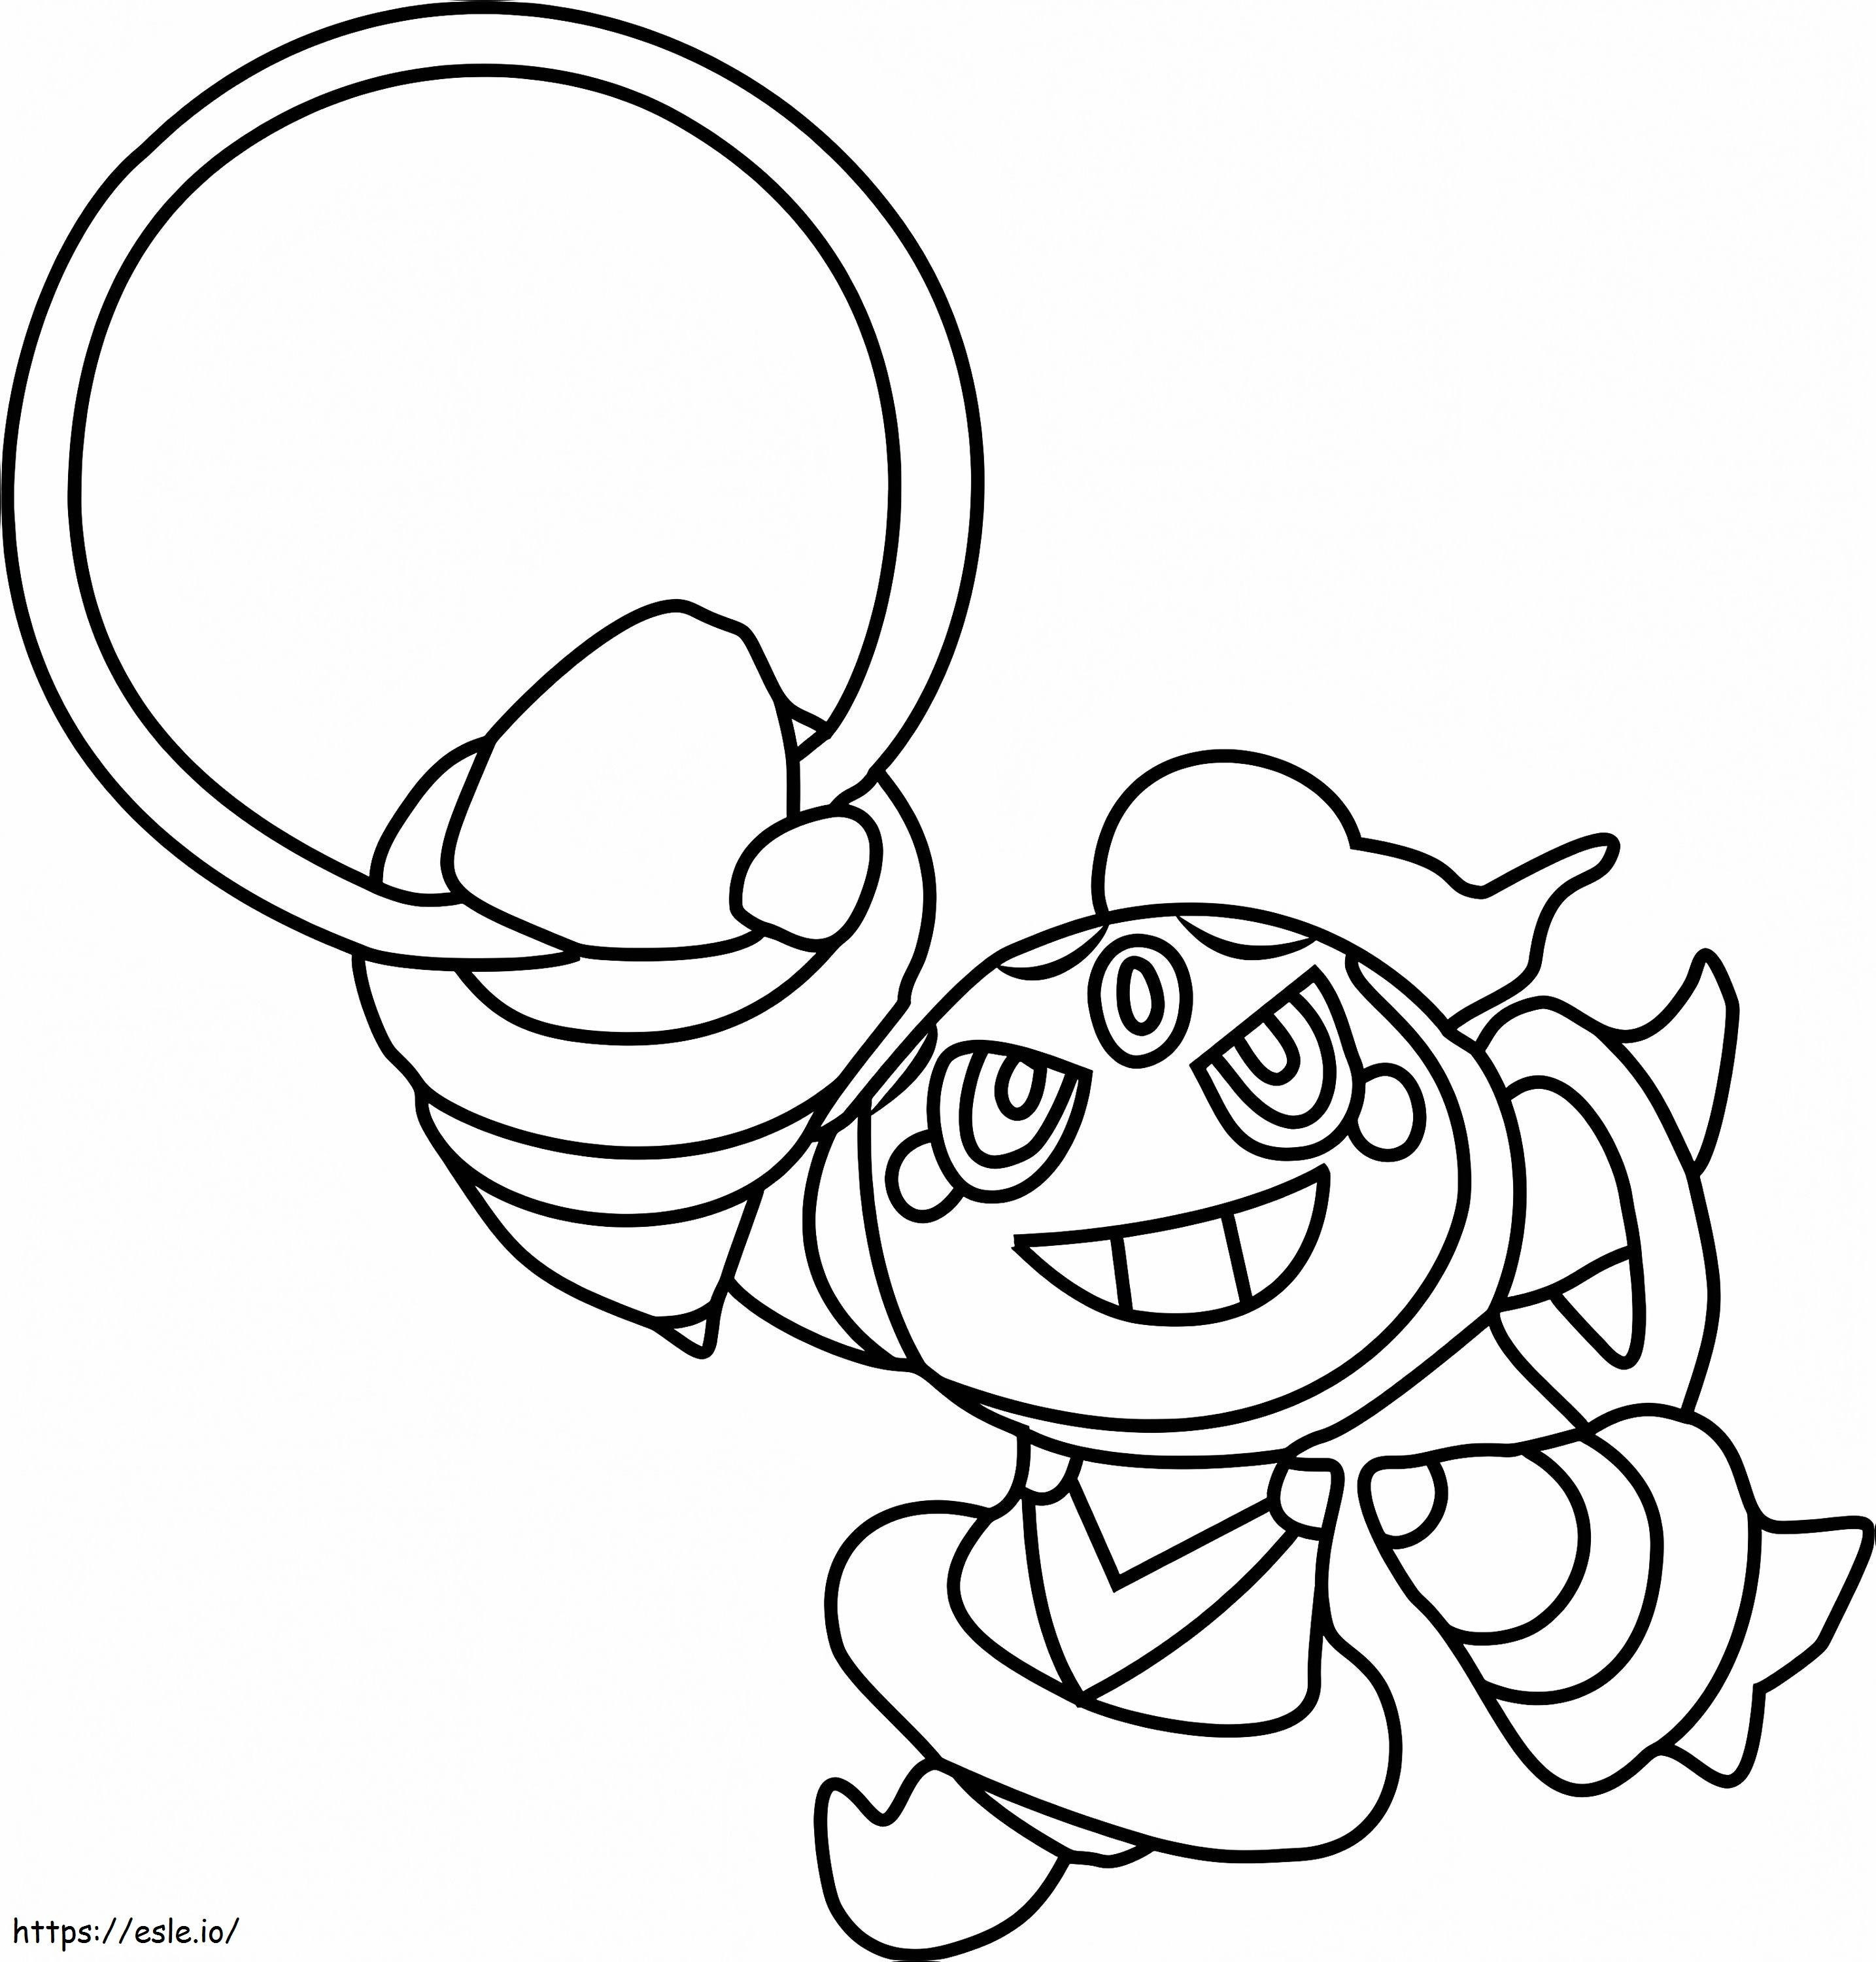 1530672802 Touch Pokemon A4 coloring page